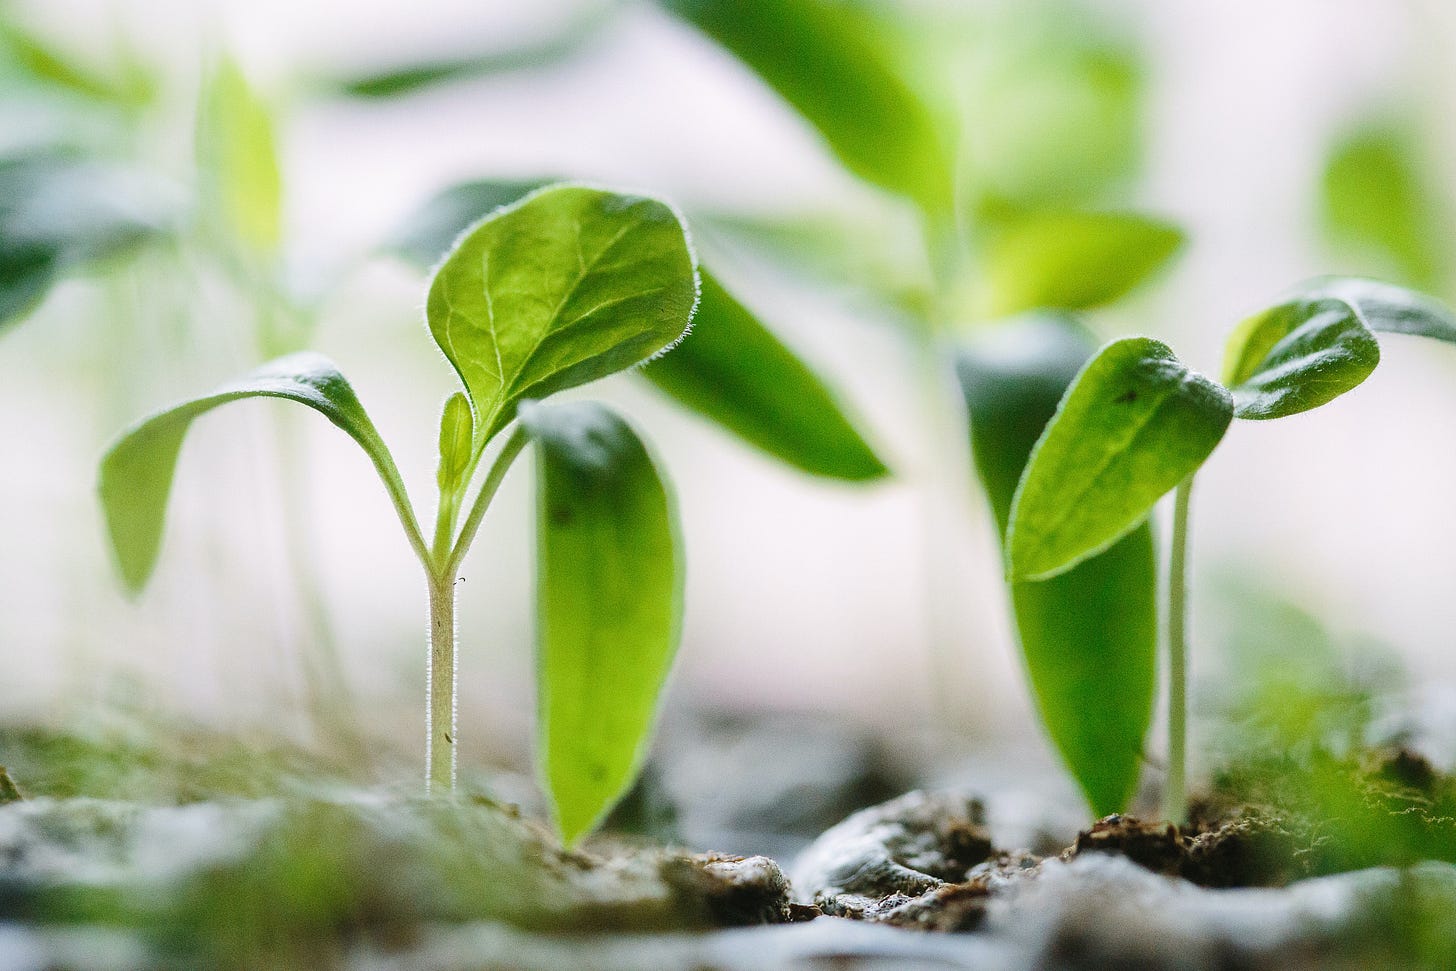 Photo of two sprouts growing out of dirt by Francesco Gallaretti on Unsplash.